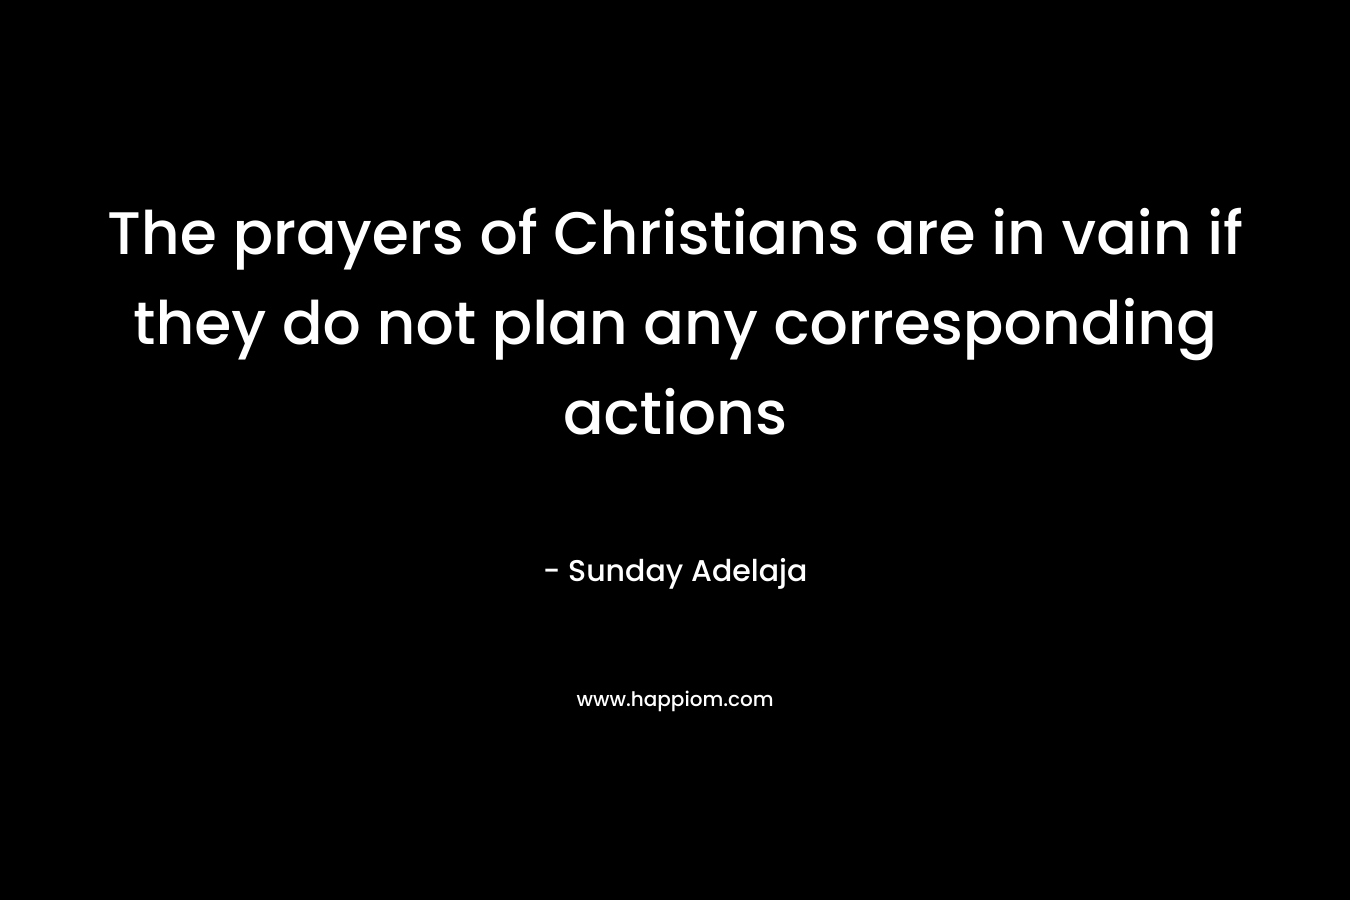 The prayers of Christians are in vain if they do not plan any corresponding actions – Sunday Adelaja